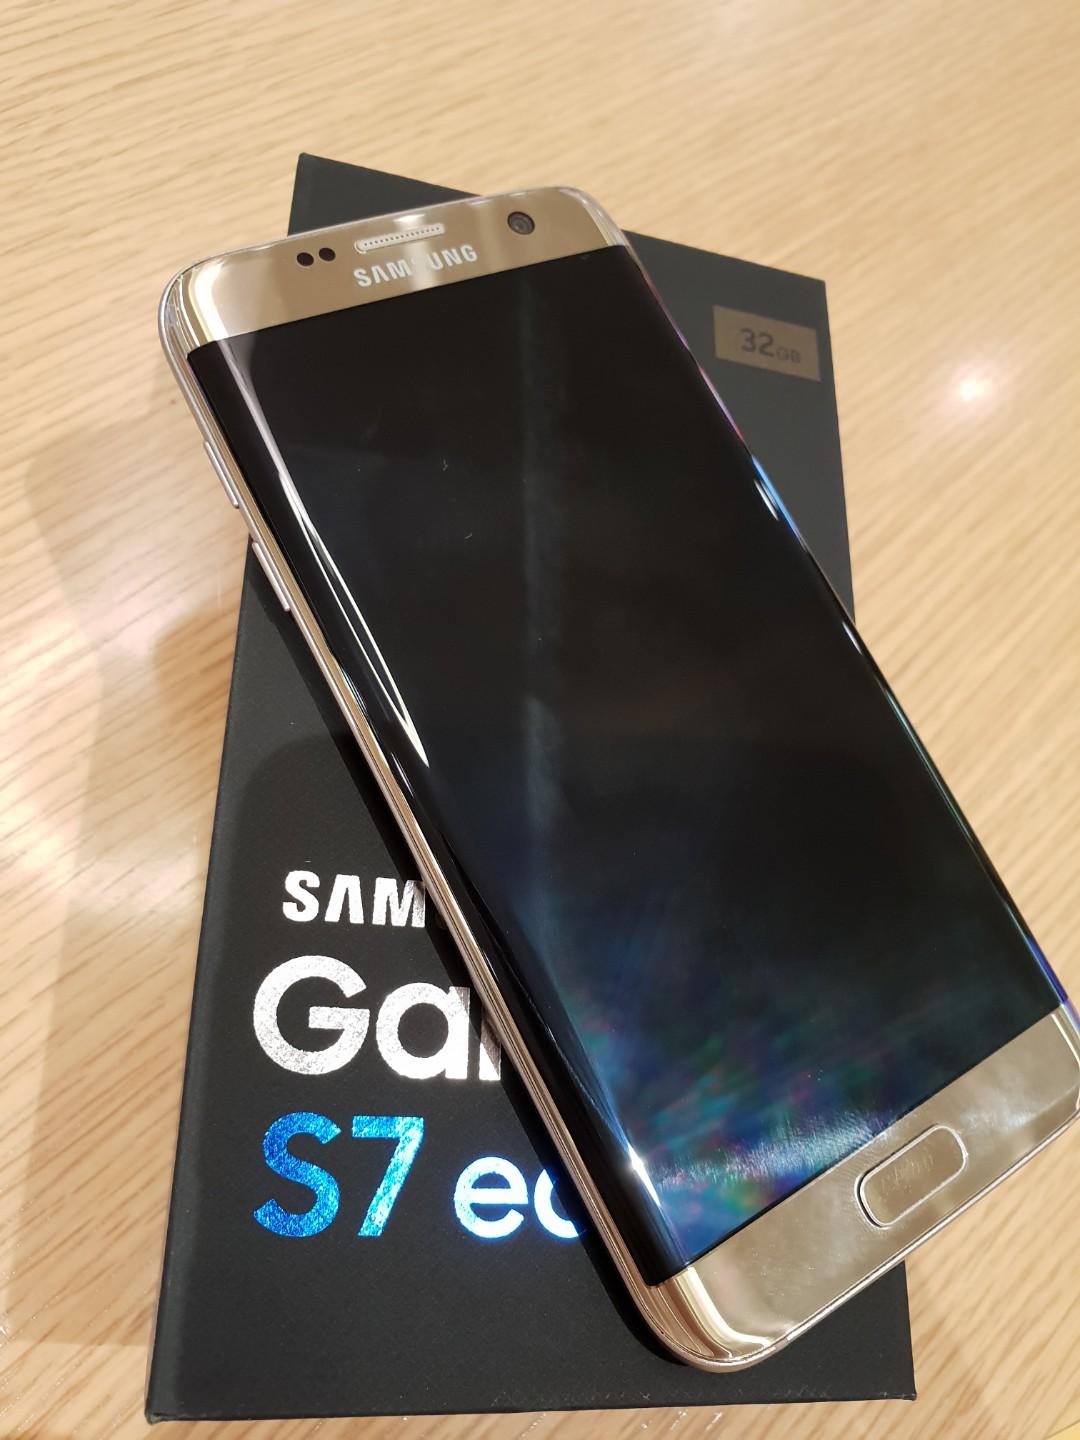 Samsung S7 edge 32GB Gold Colour, Phones & Mobile Phones, Android Samsung Carousell